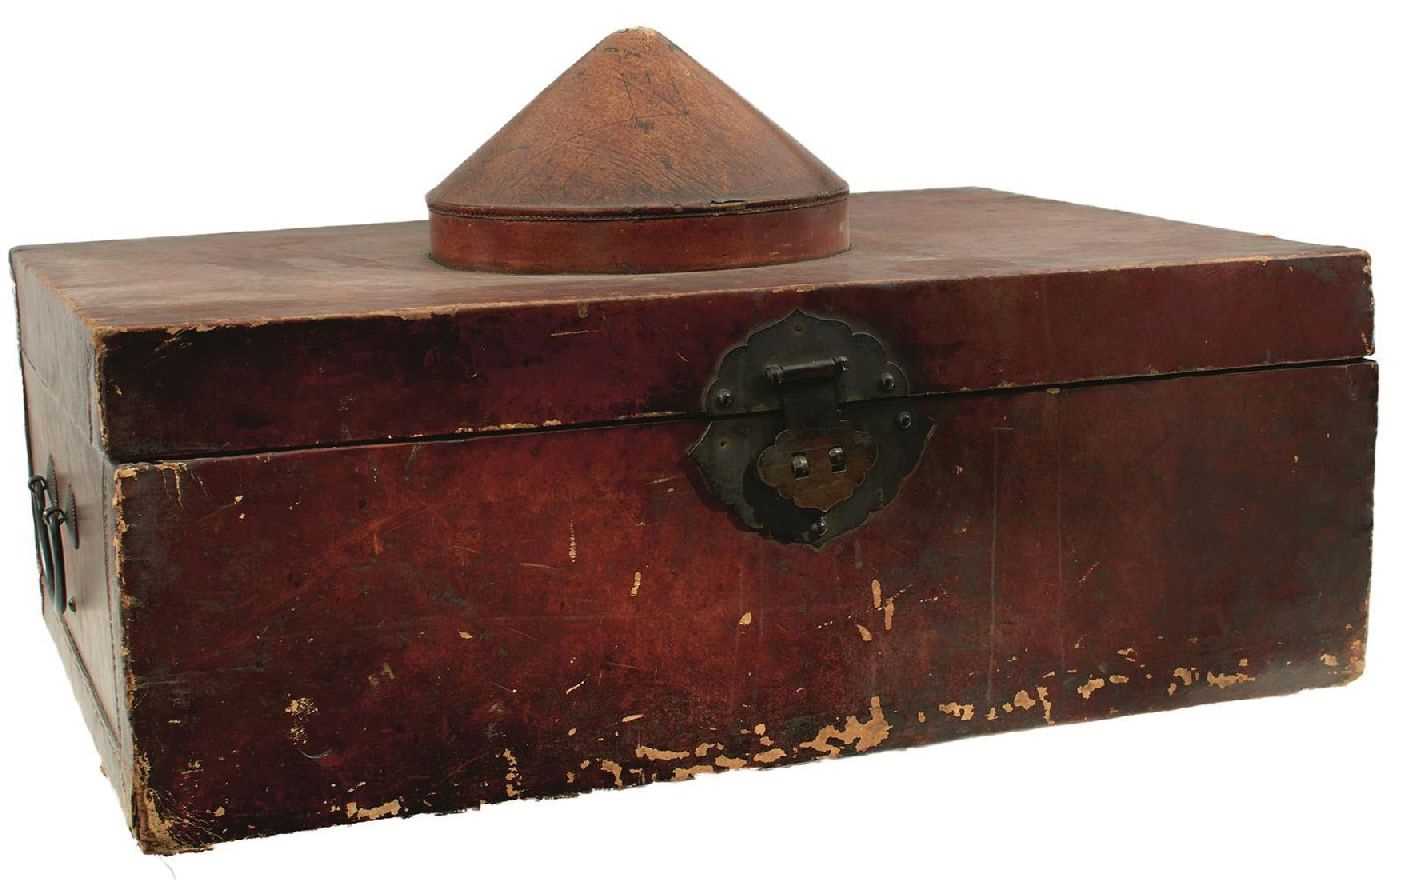 Lot 31 - A LATE 18TH CENTURY CHINESE OR KOREAN STORAGE BOX FOR AN ARMOUR